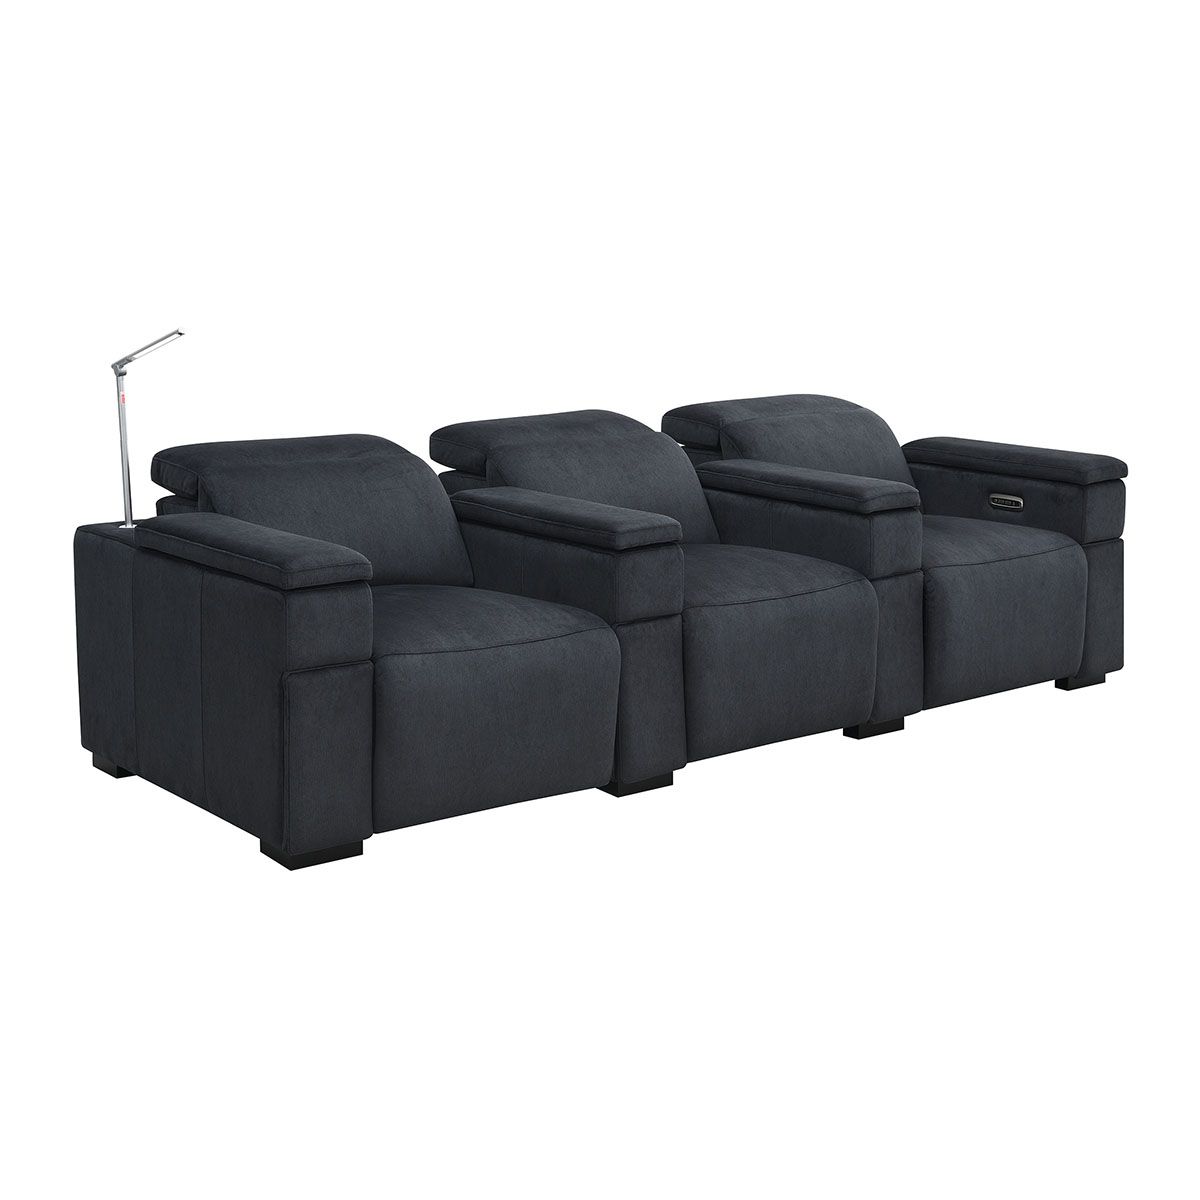 RowOne Calveri - Charcoal Patterned Polyester Microfiber Fabric - 3 Chair Row - angled front view